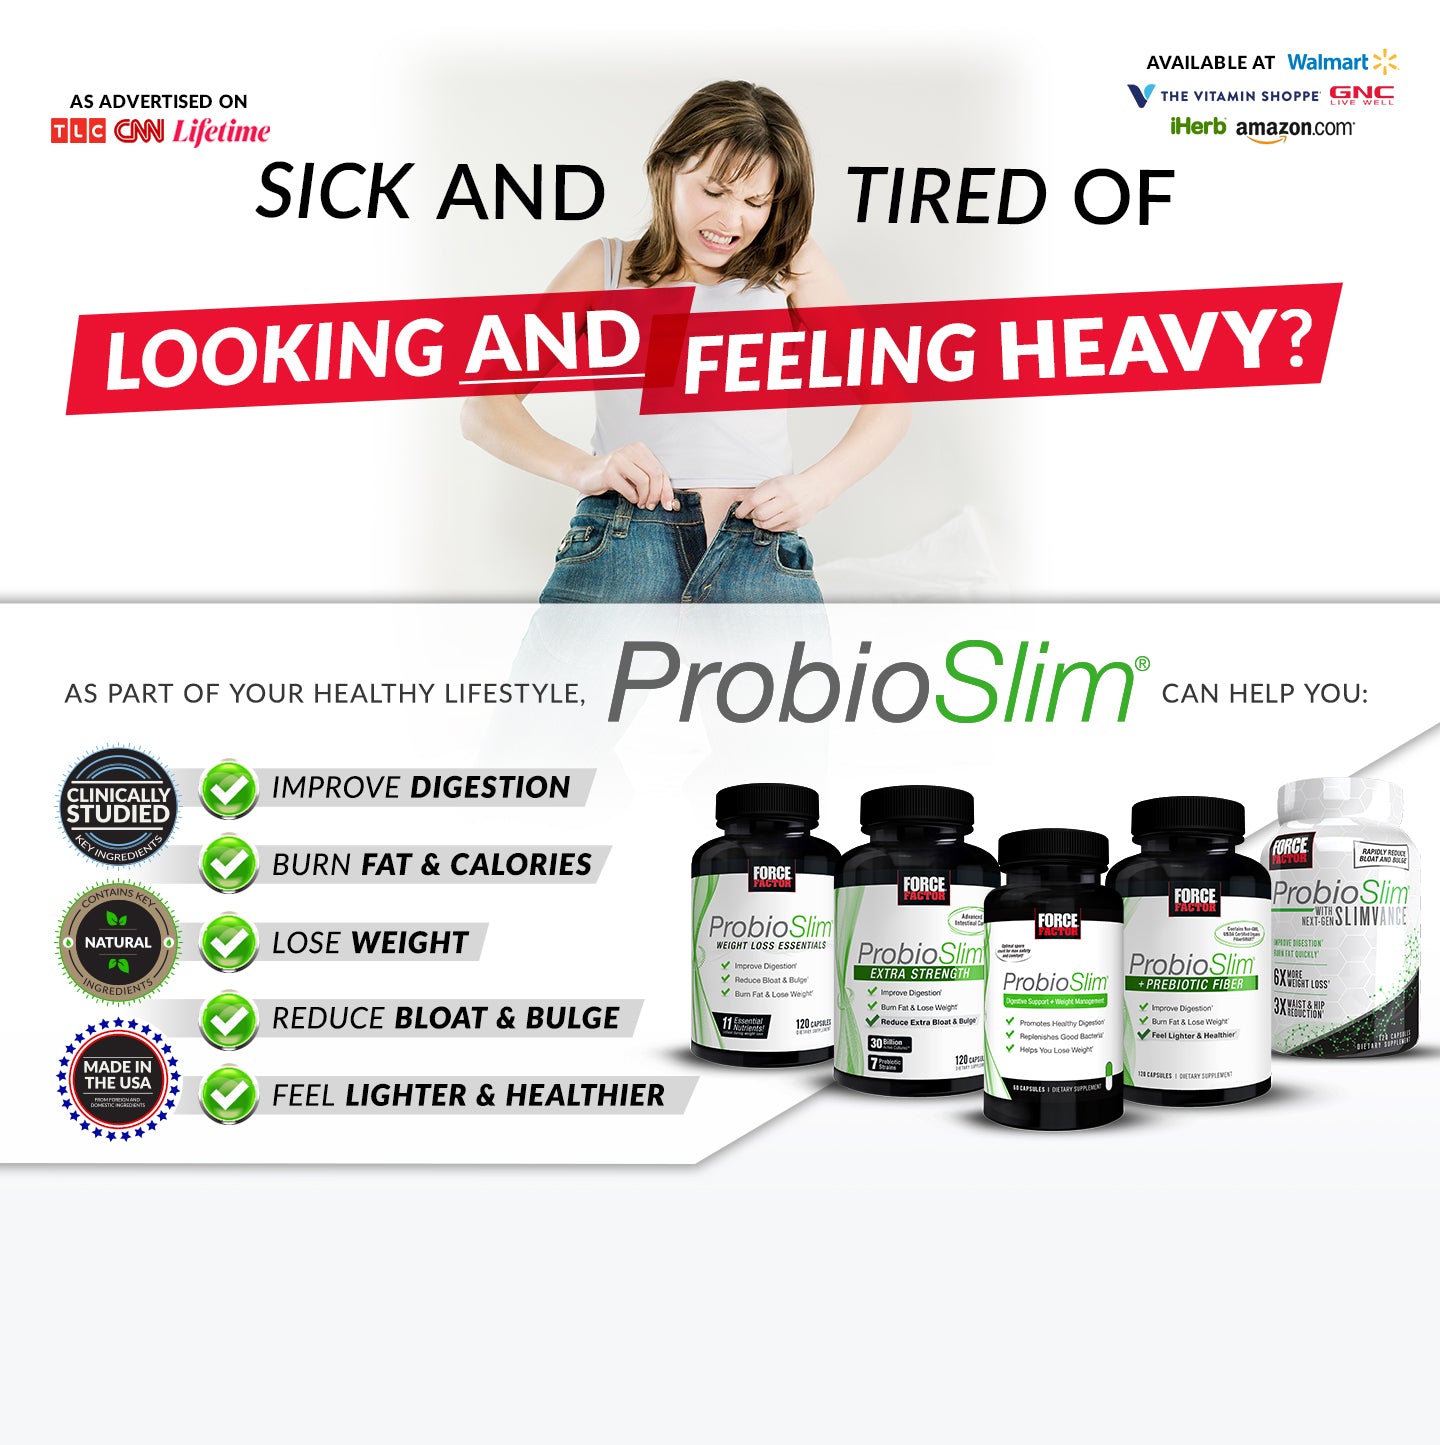 SICK AND TIRED OF LOOKING AND FEELING HEAVY? As part of your healthy lifestyle, ProbioSlim® can help you: Improve Digestion, Burn Fat & Calories, Lose Weight, Reduce Bloat & Bulge, Feel Lighter & Healthier.